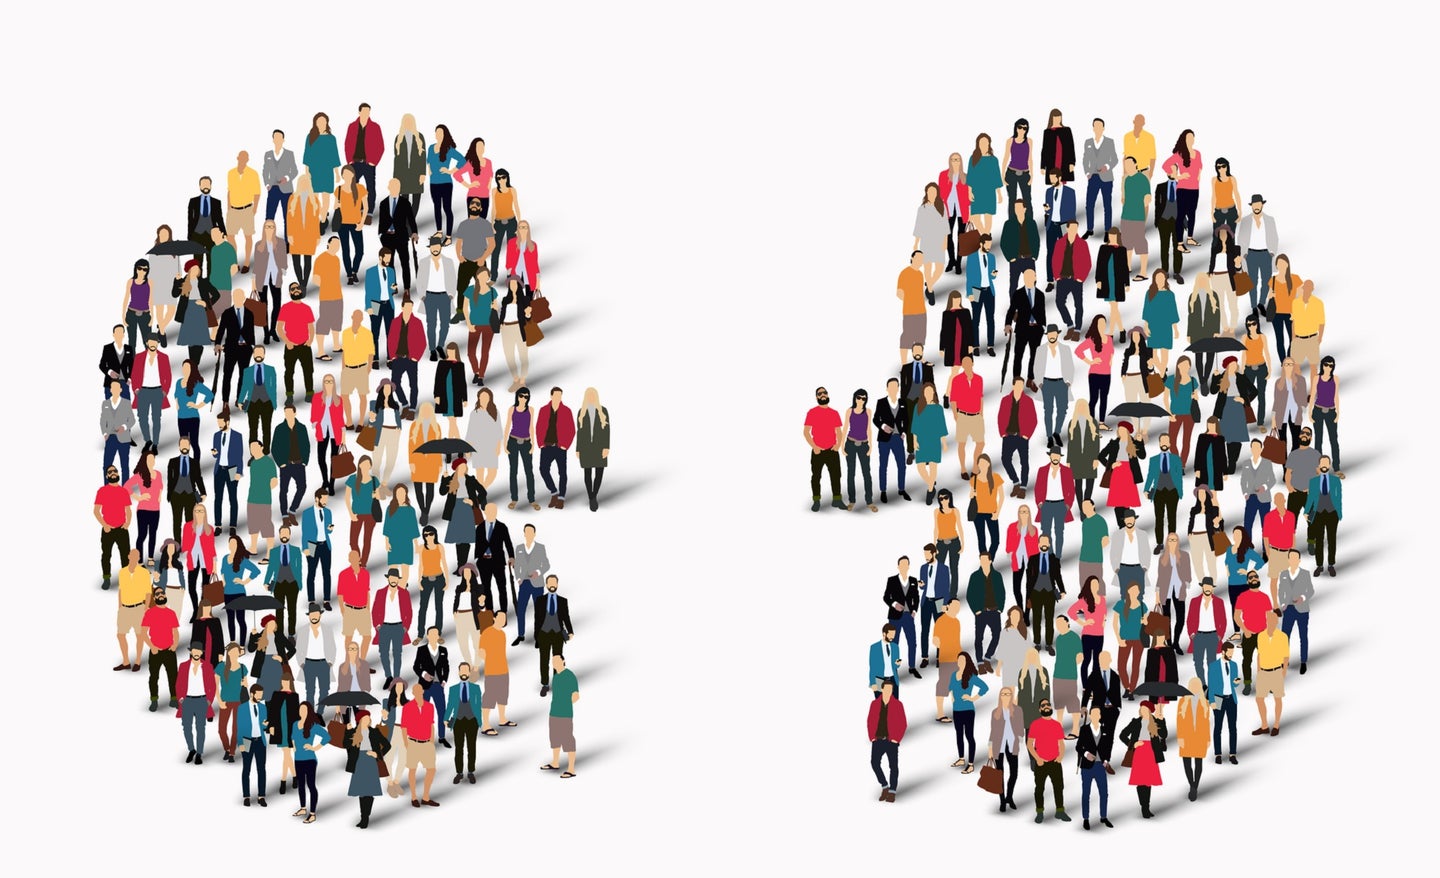 People of different races forming two kidneys in an illustration